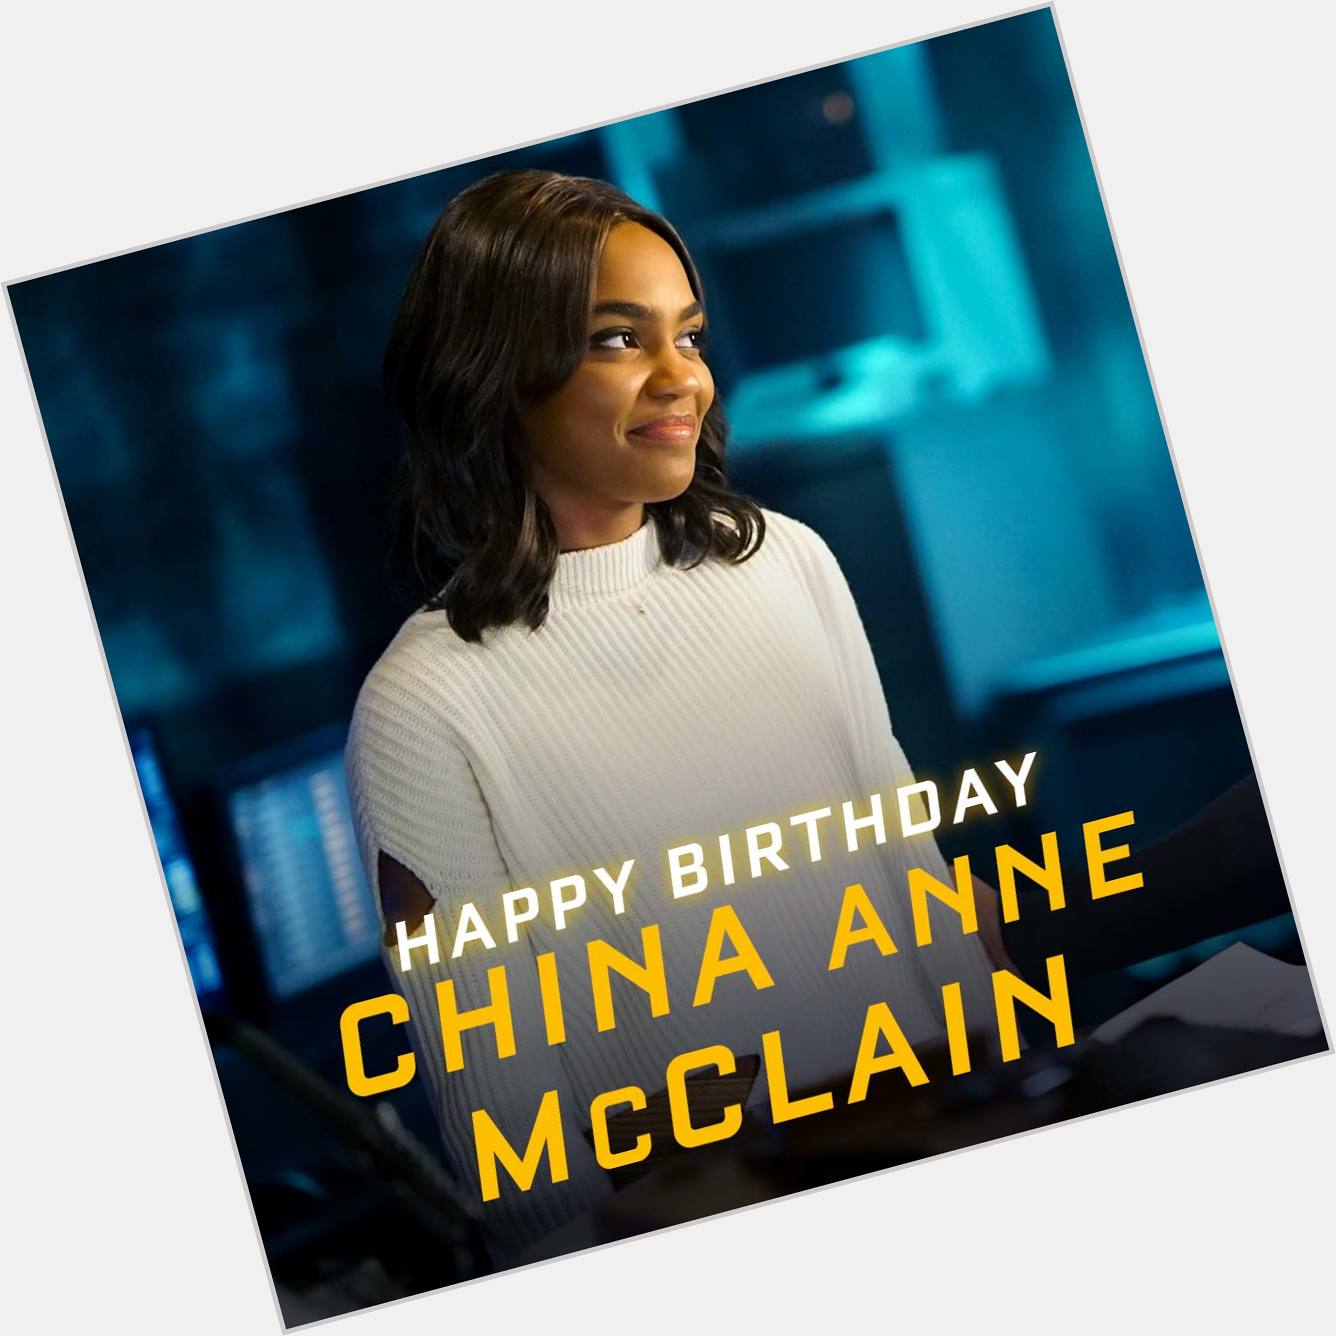 Time to celebrate! Happy Birthday, China Anne McClain! 